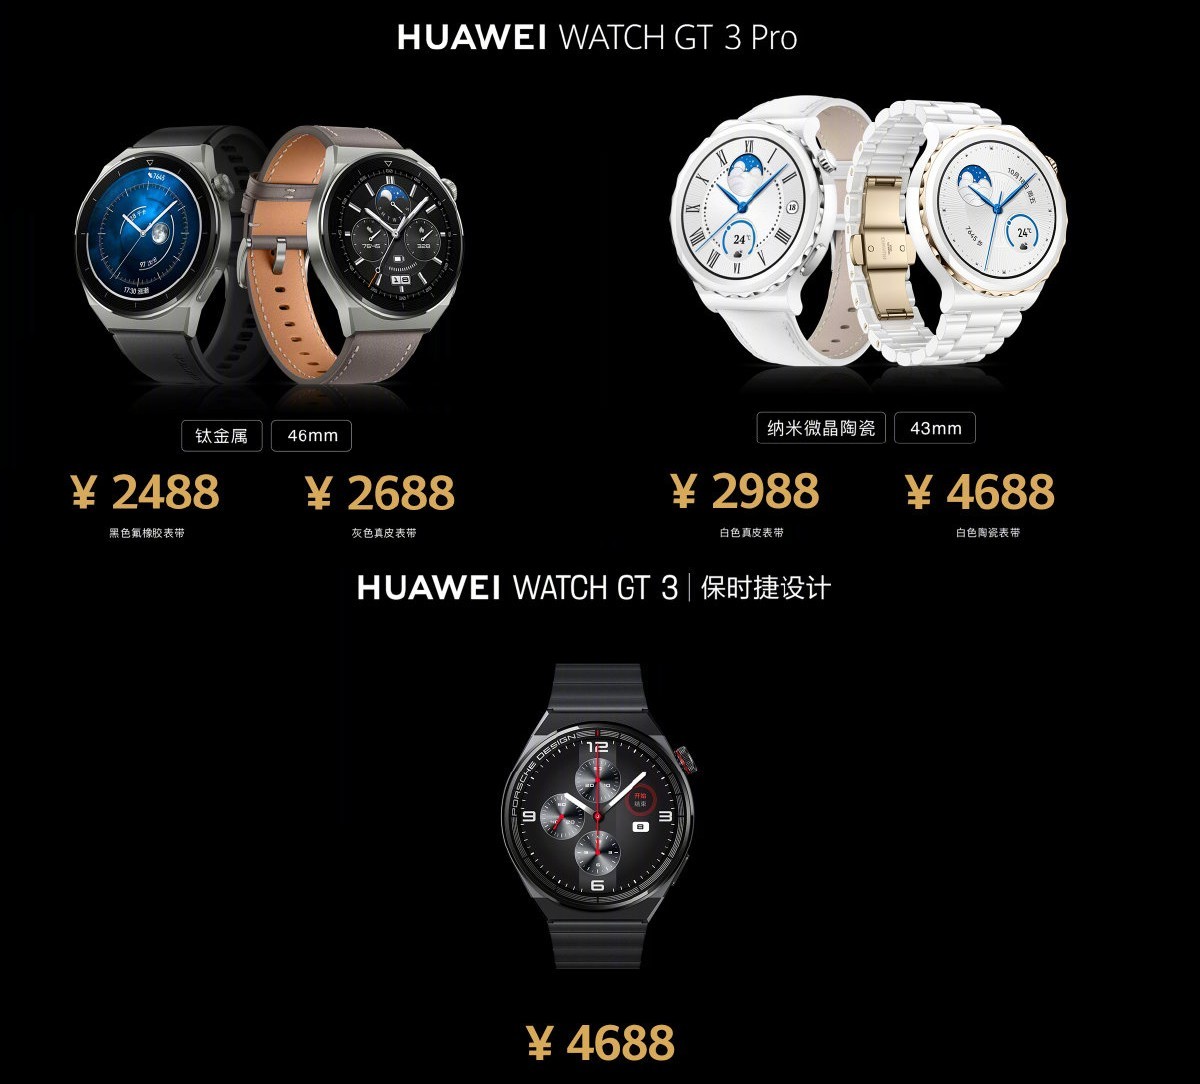 Huawei Watch GT 3 Pro unveiled with ECG